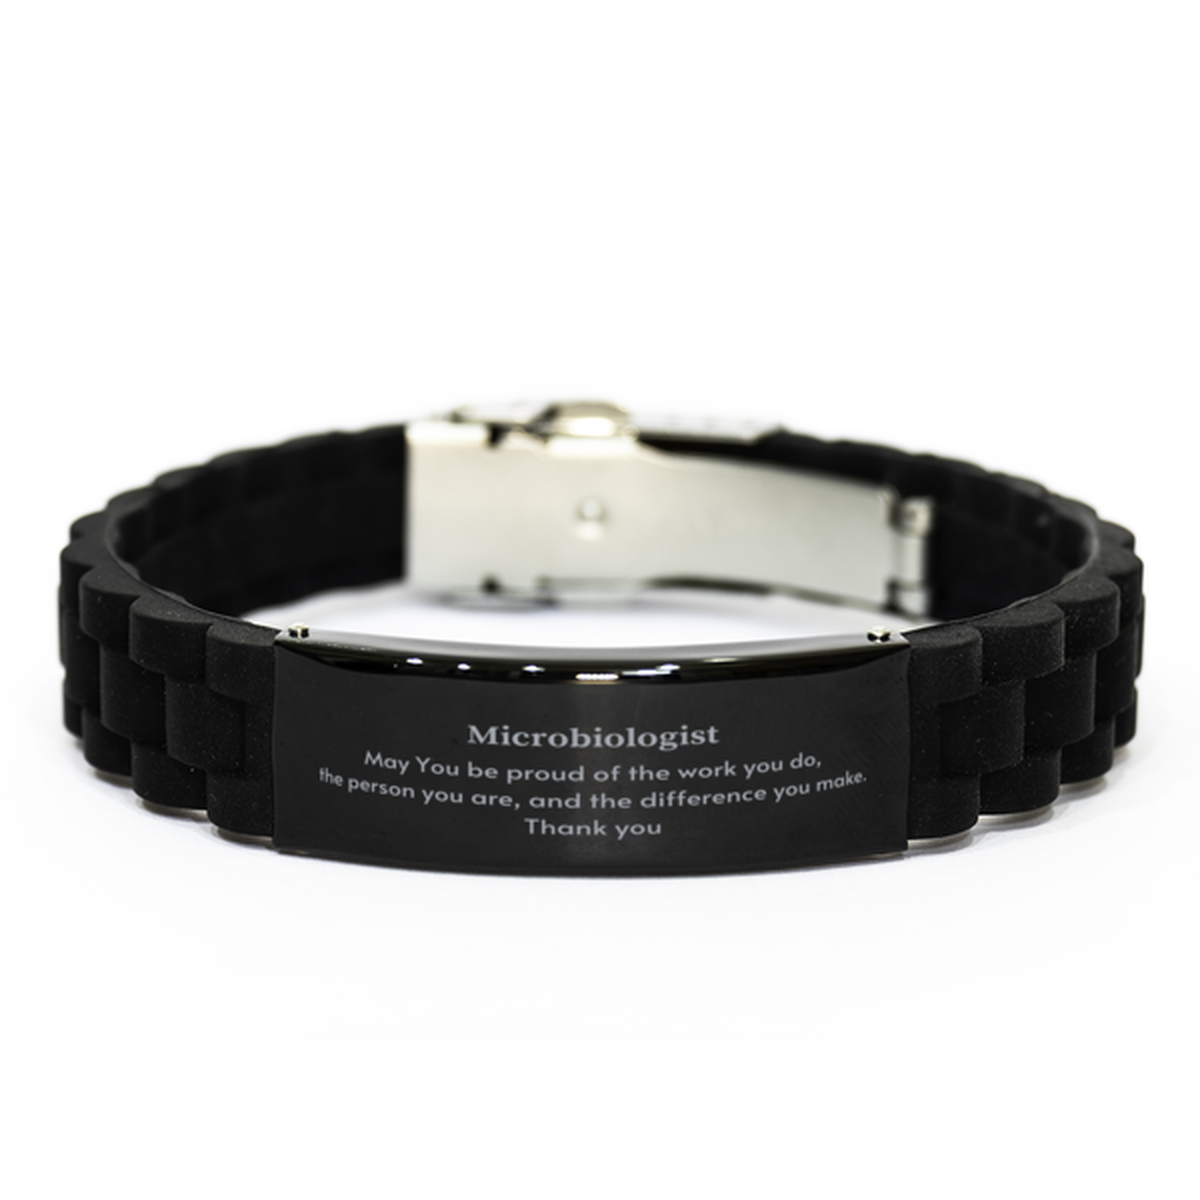 Heartwarming Black Glidelock Clasp Bracelet Retirement Coworkers Gifts for Microbiologist, Microbiologist May You be proud of the work you do, the person you are Gifts for Boss Men Women Friends